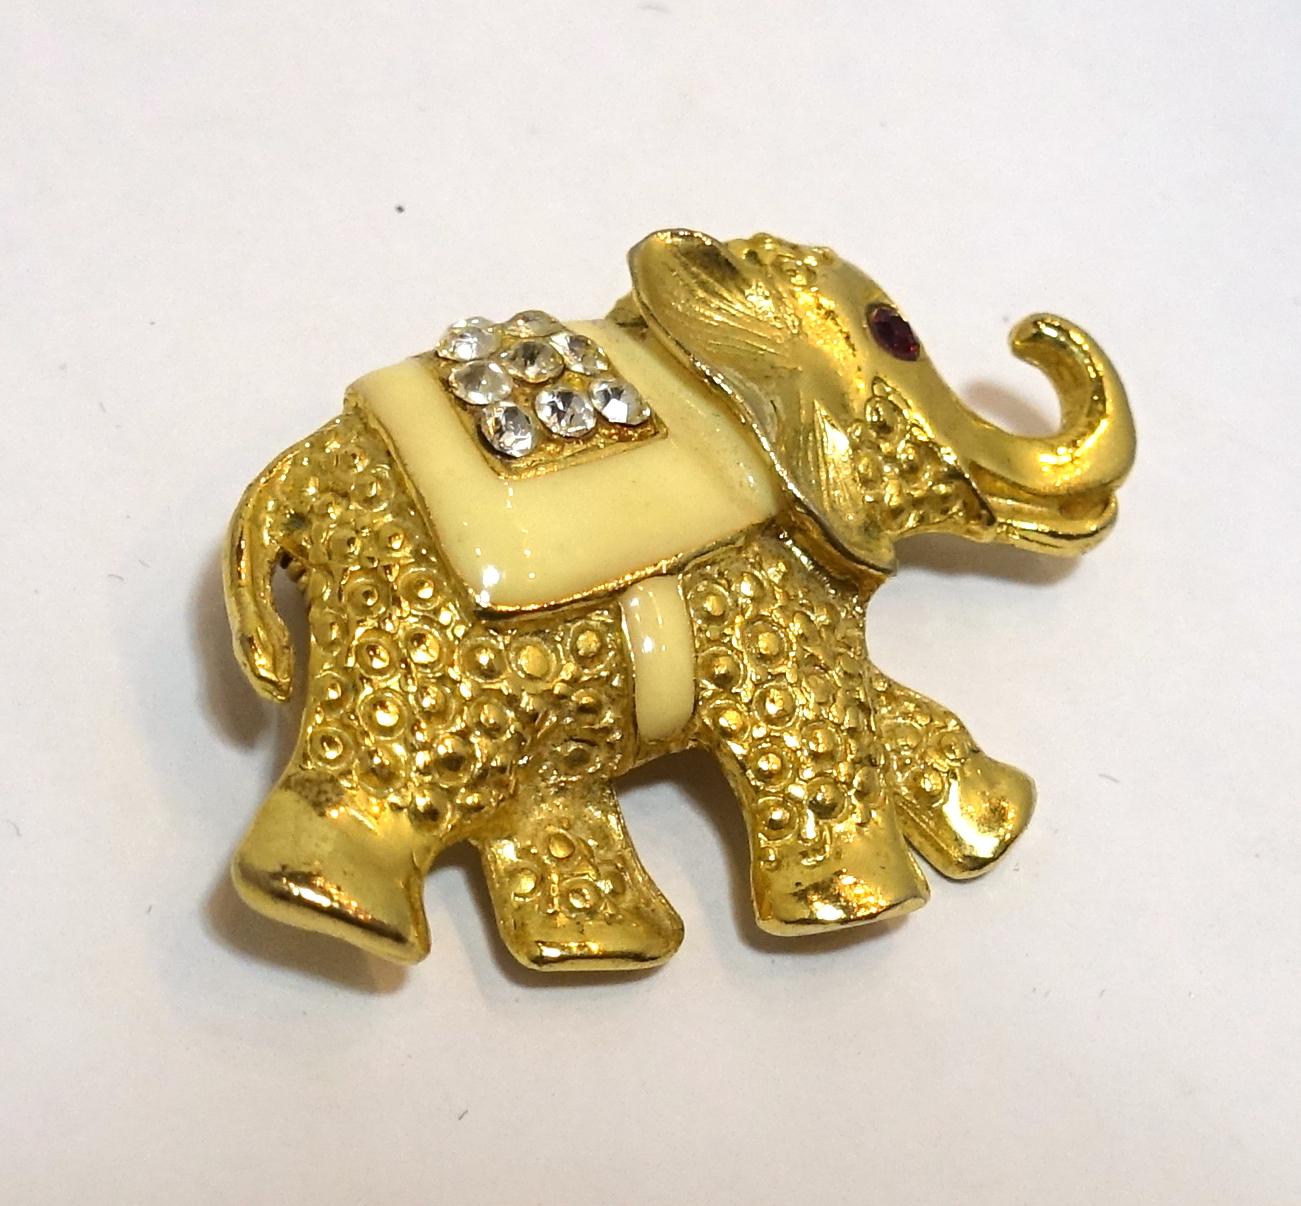 This vintage 1960s brooch features an elephant design with ivory color enameling and clear crystal accents in a gold tone setting.  This elephant brooch measure 2” x 1” and is in excellent condition.